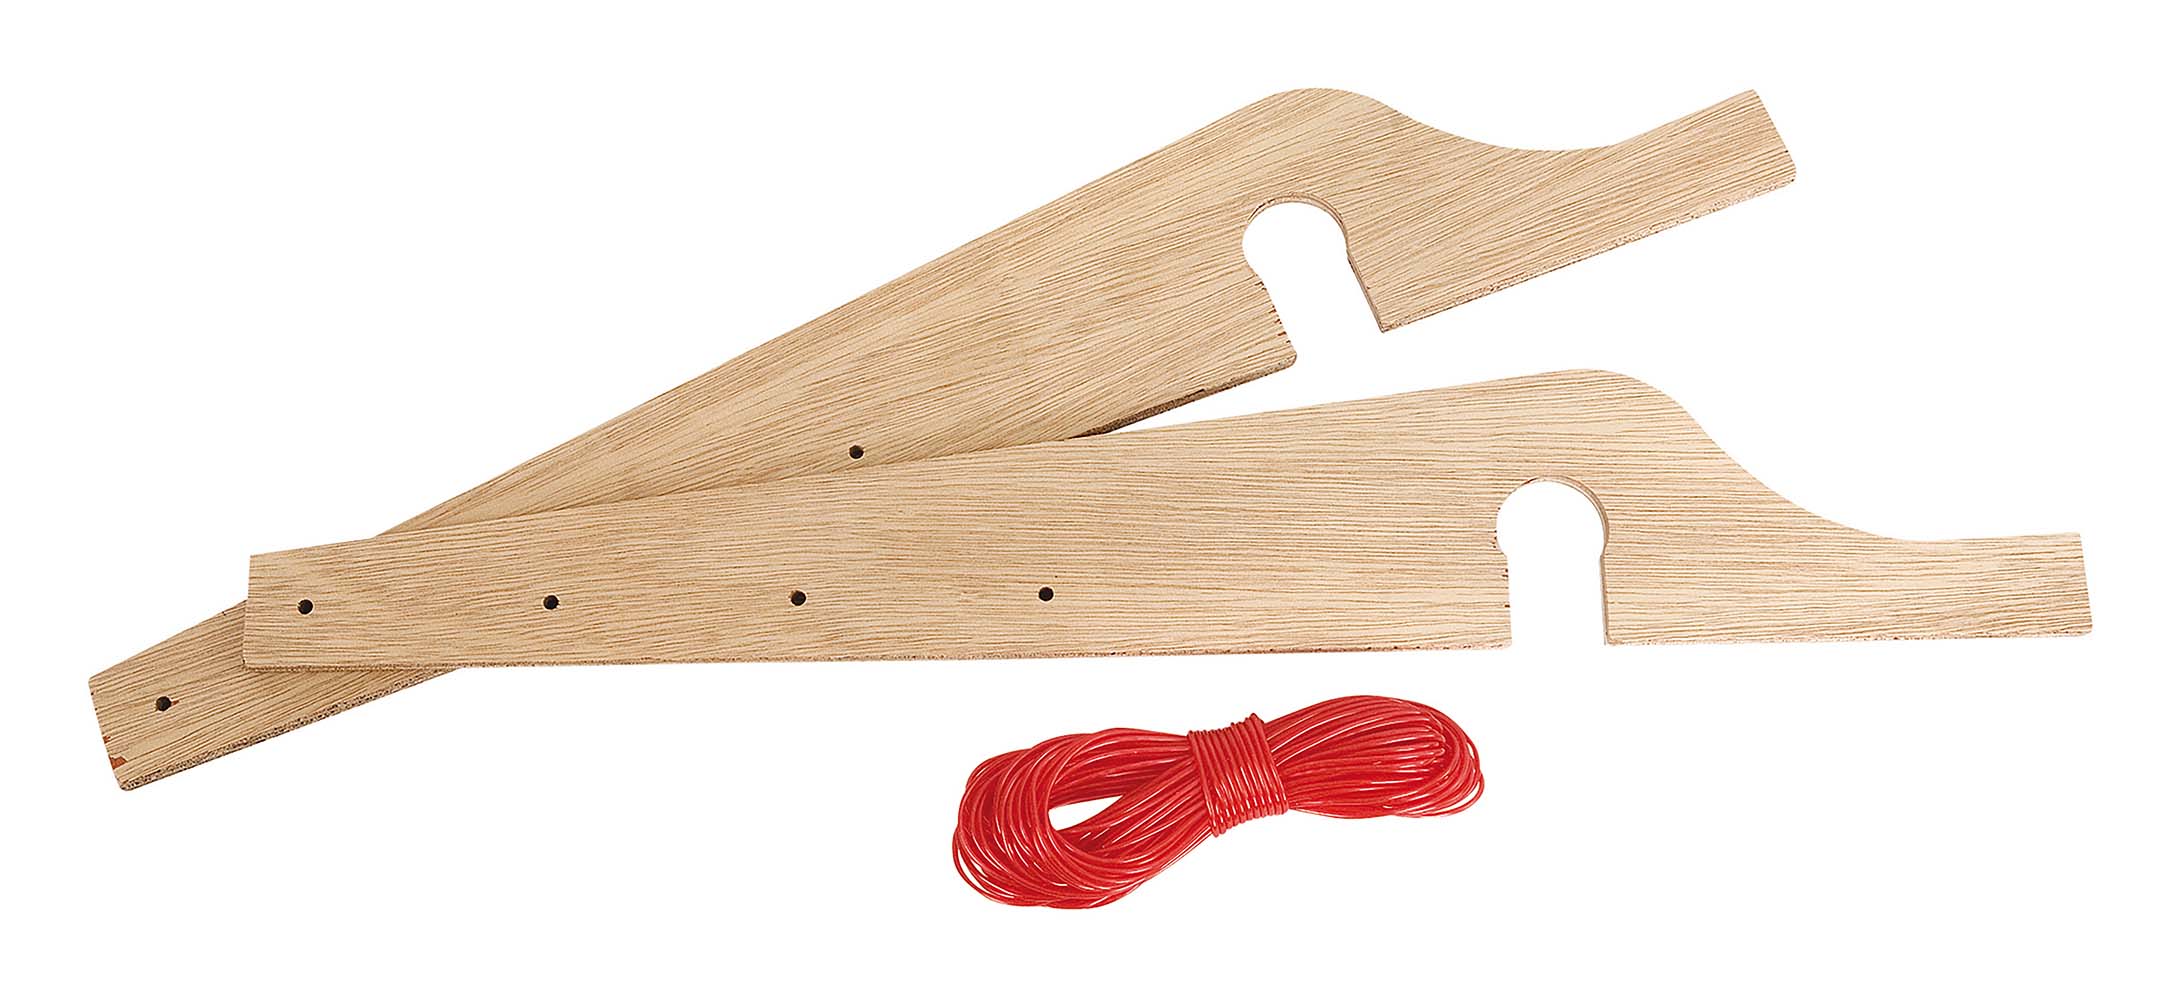 6415175 Clothesline set for caravan. Suitable for horizontal mounting on caravan handles. Contains 2 watertight glued wooden holders and 20 metres of plastic clothesline.